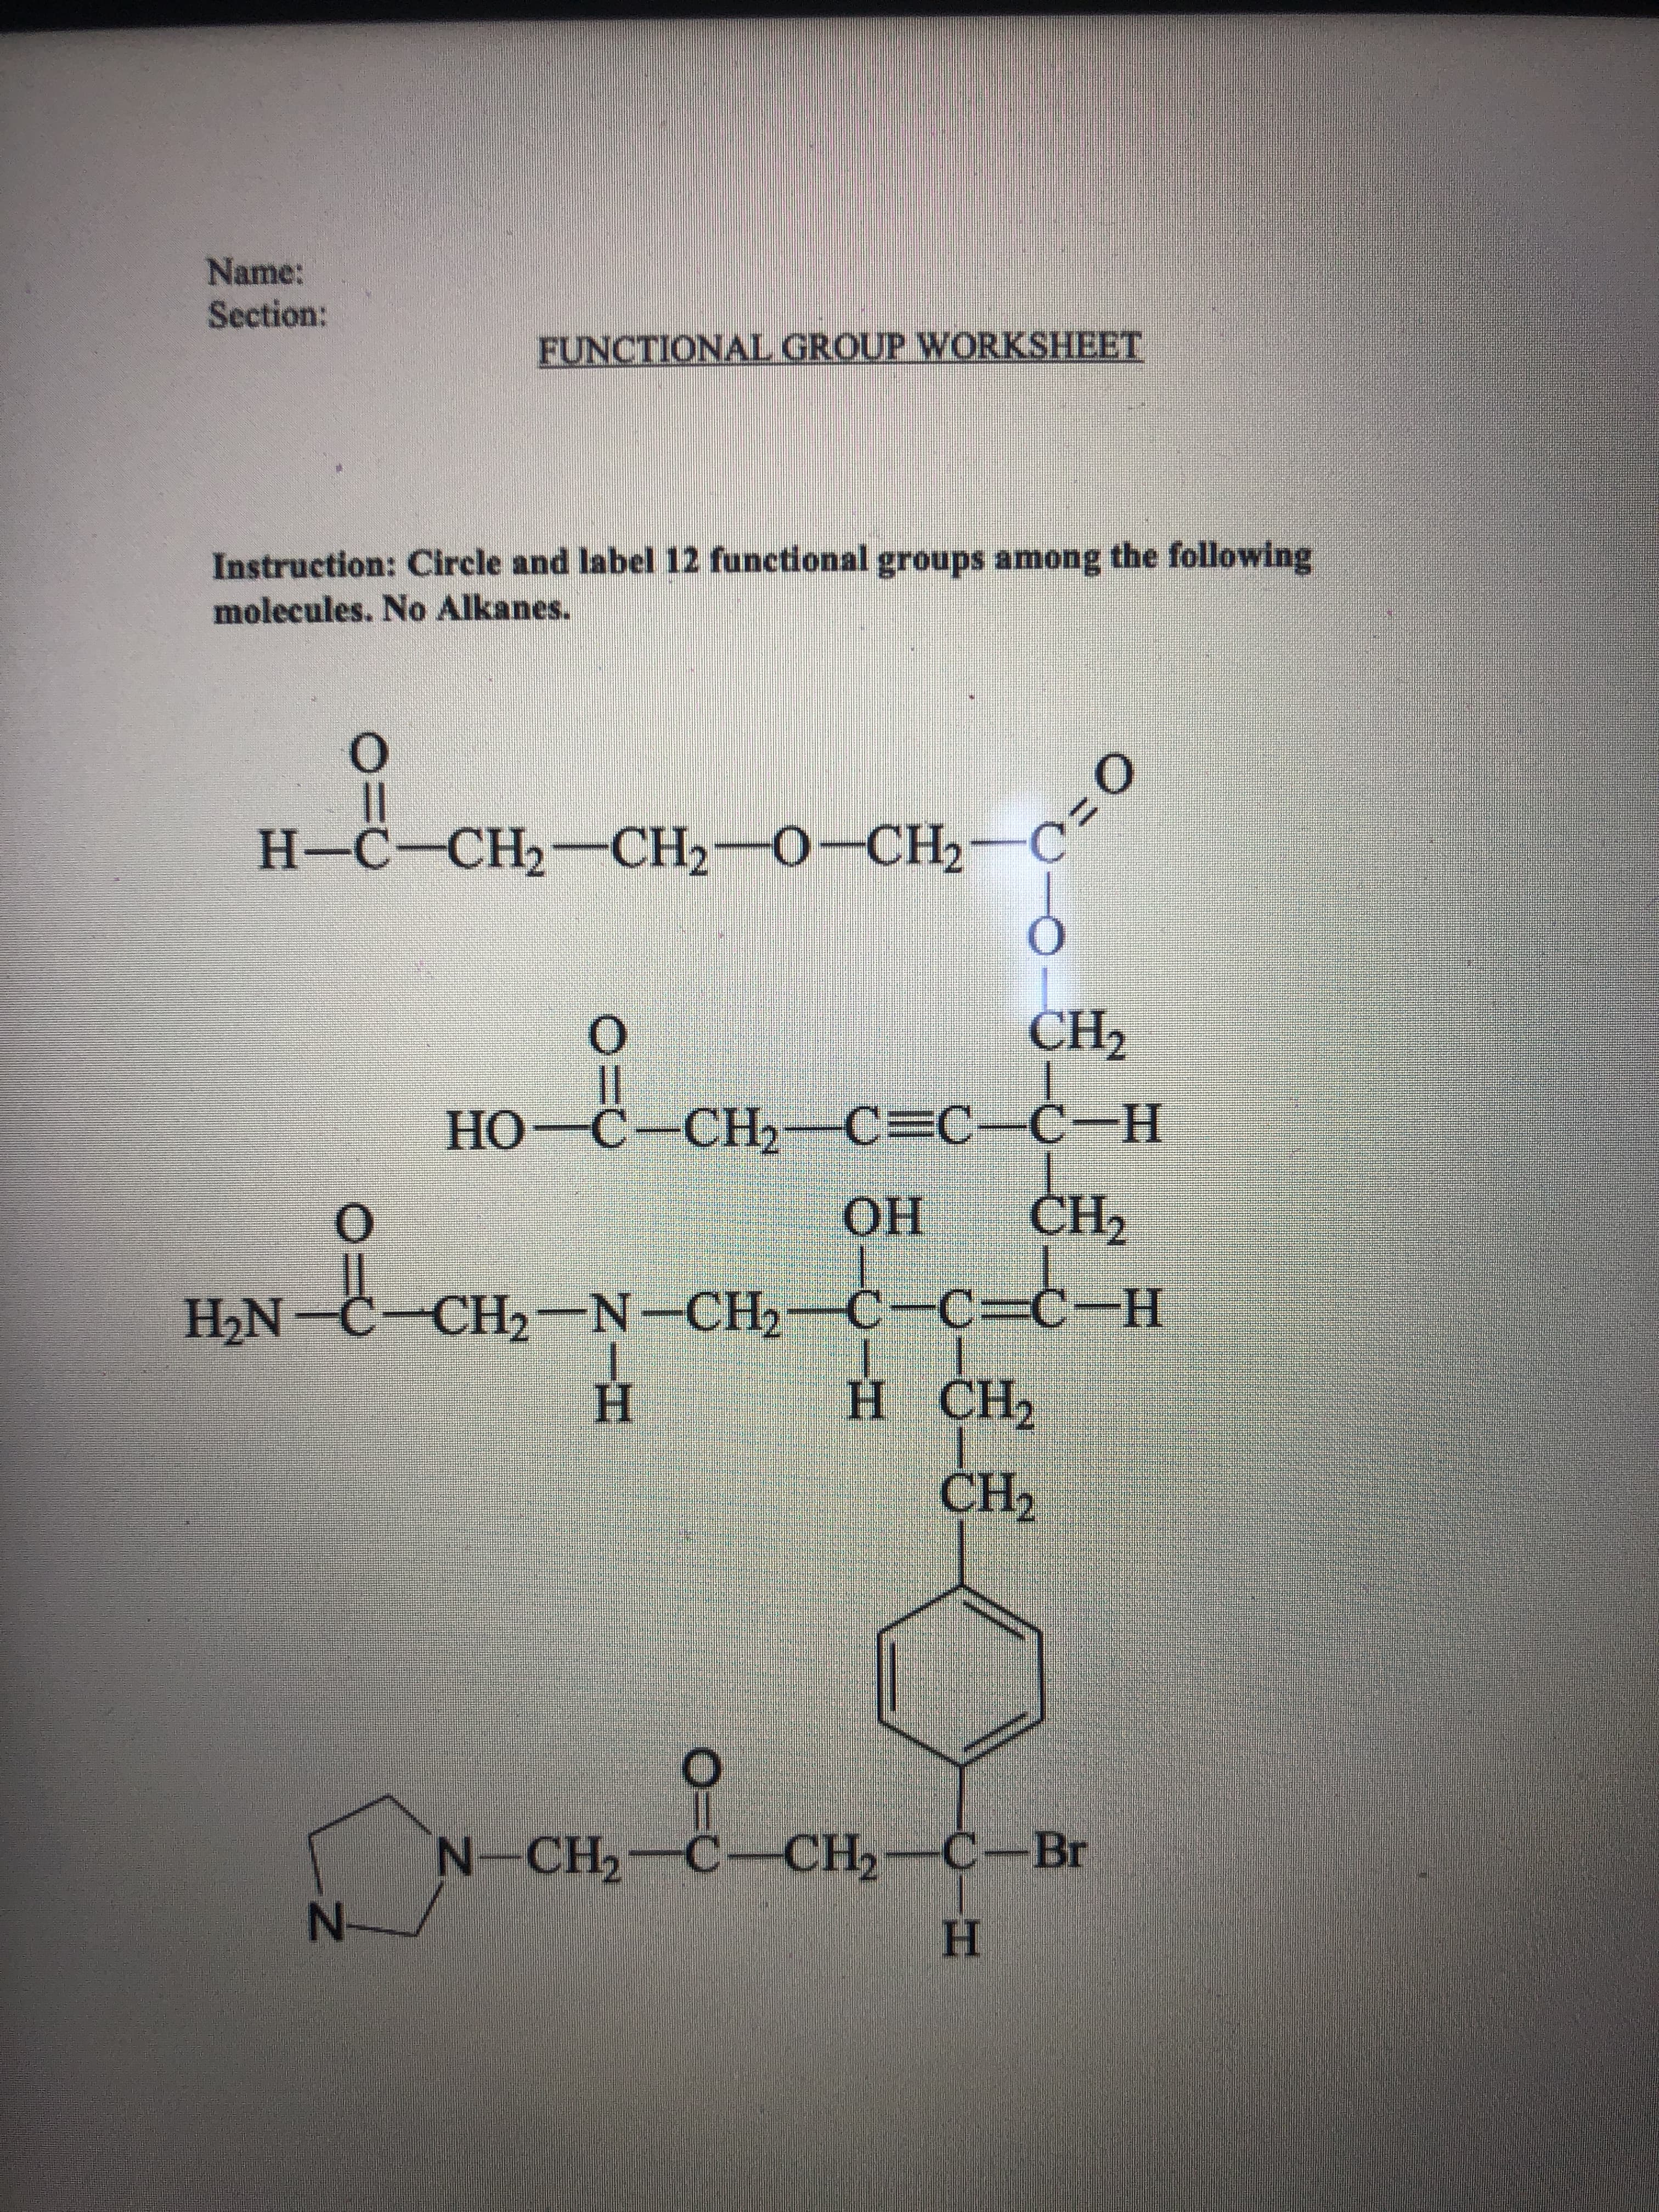 Name:
Section:
FUNCTIONAL GROUP WORKSHEET
Instruction: Circle and label 12 functional groups among the following
molecules. No Alkanes.
0
H-C-C
-CH₂-CH₂-
H-C-CH2-CH2O-CH2
O
CH₂
||
HO-C–CH, C=CC-H
O
OH
CH₂
CH,-N-CH,c-c=d-H
H
H CH2
CH₂
N-CH₂-C-CH₂-C-Br
H
H₂N
N-
O=0
C=0
ƒ